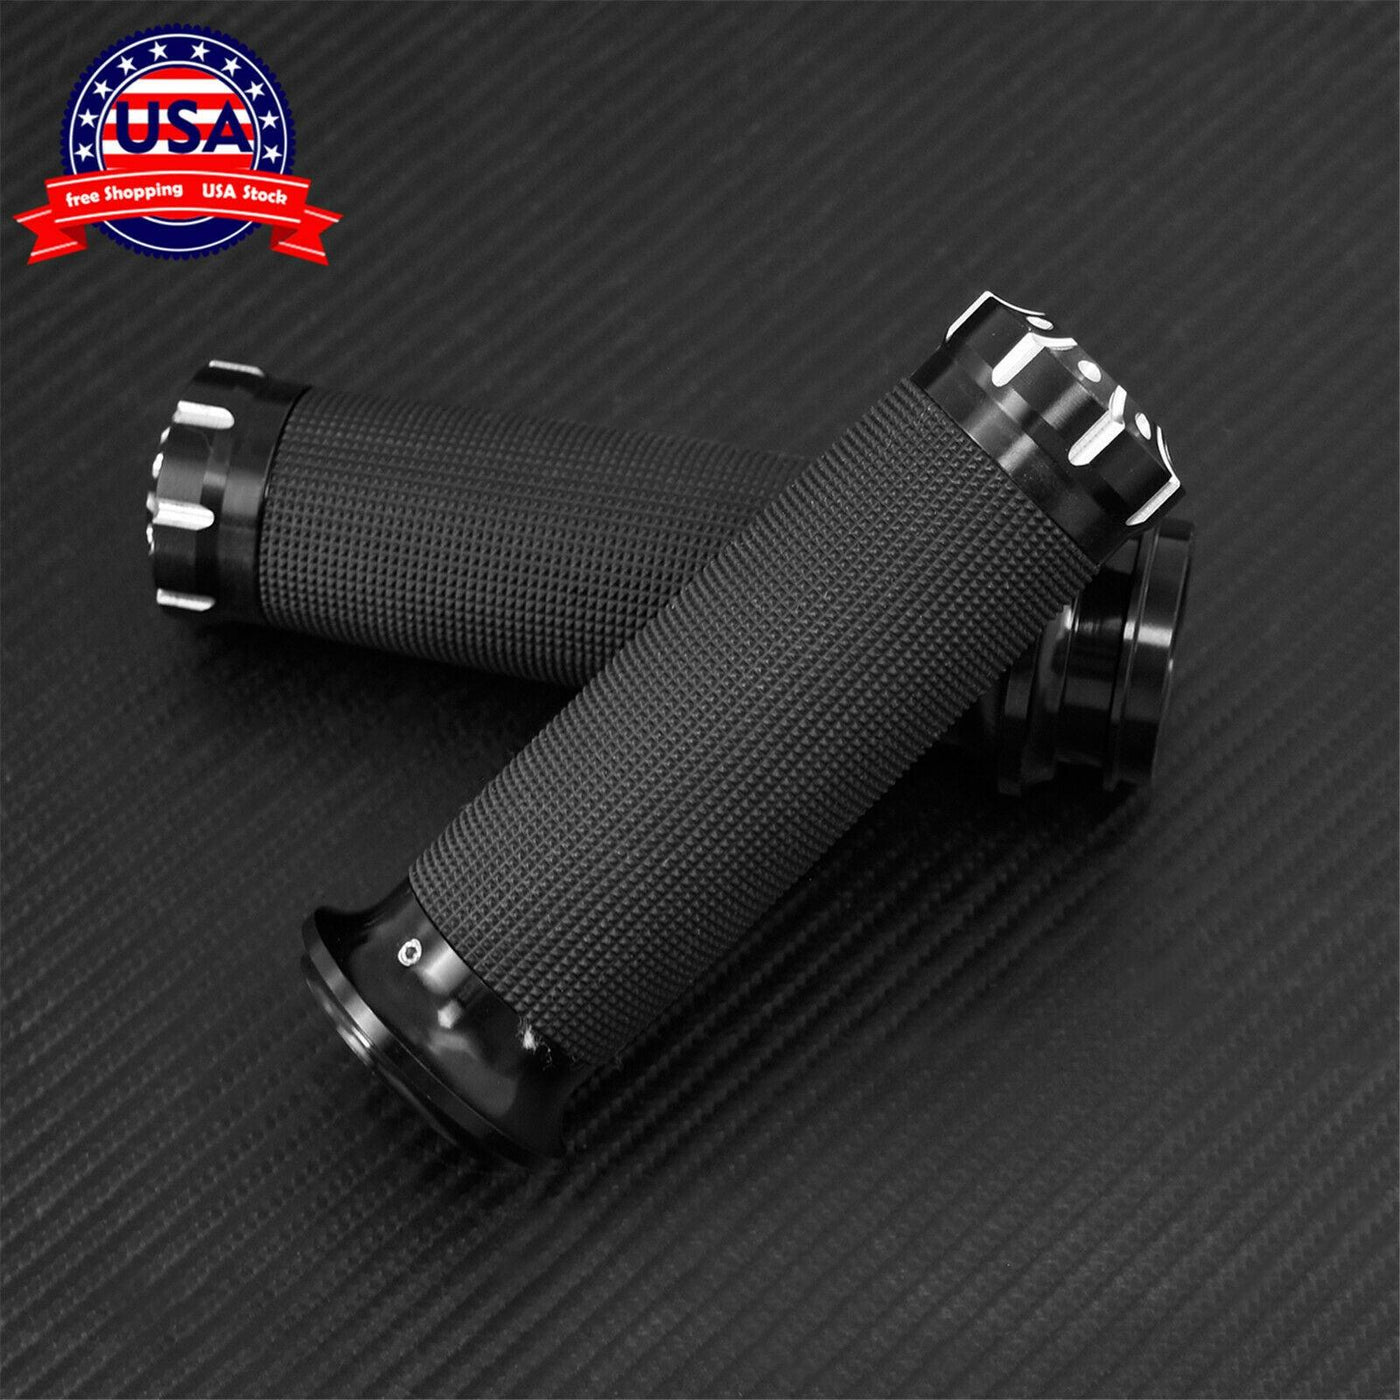 1" Electronic Throttle Hand Grips Handlebar Fit For Harley Touring 08-up FLS 16 - Moto Life Products